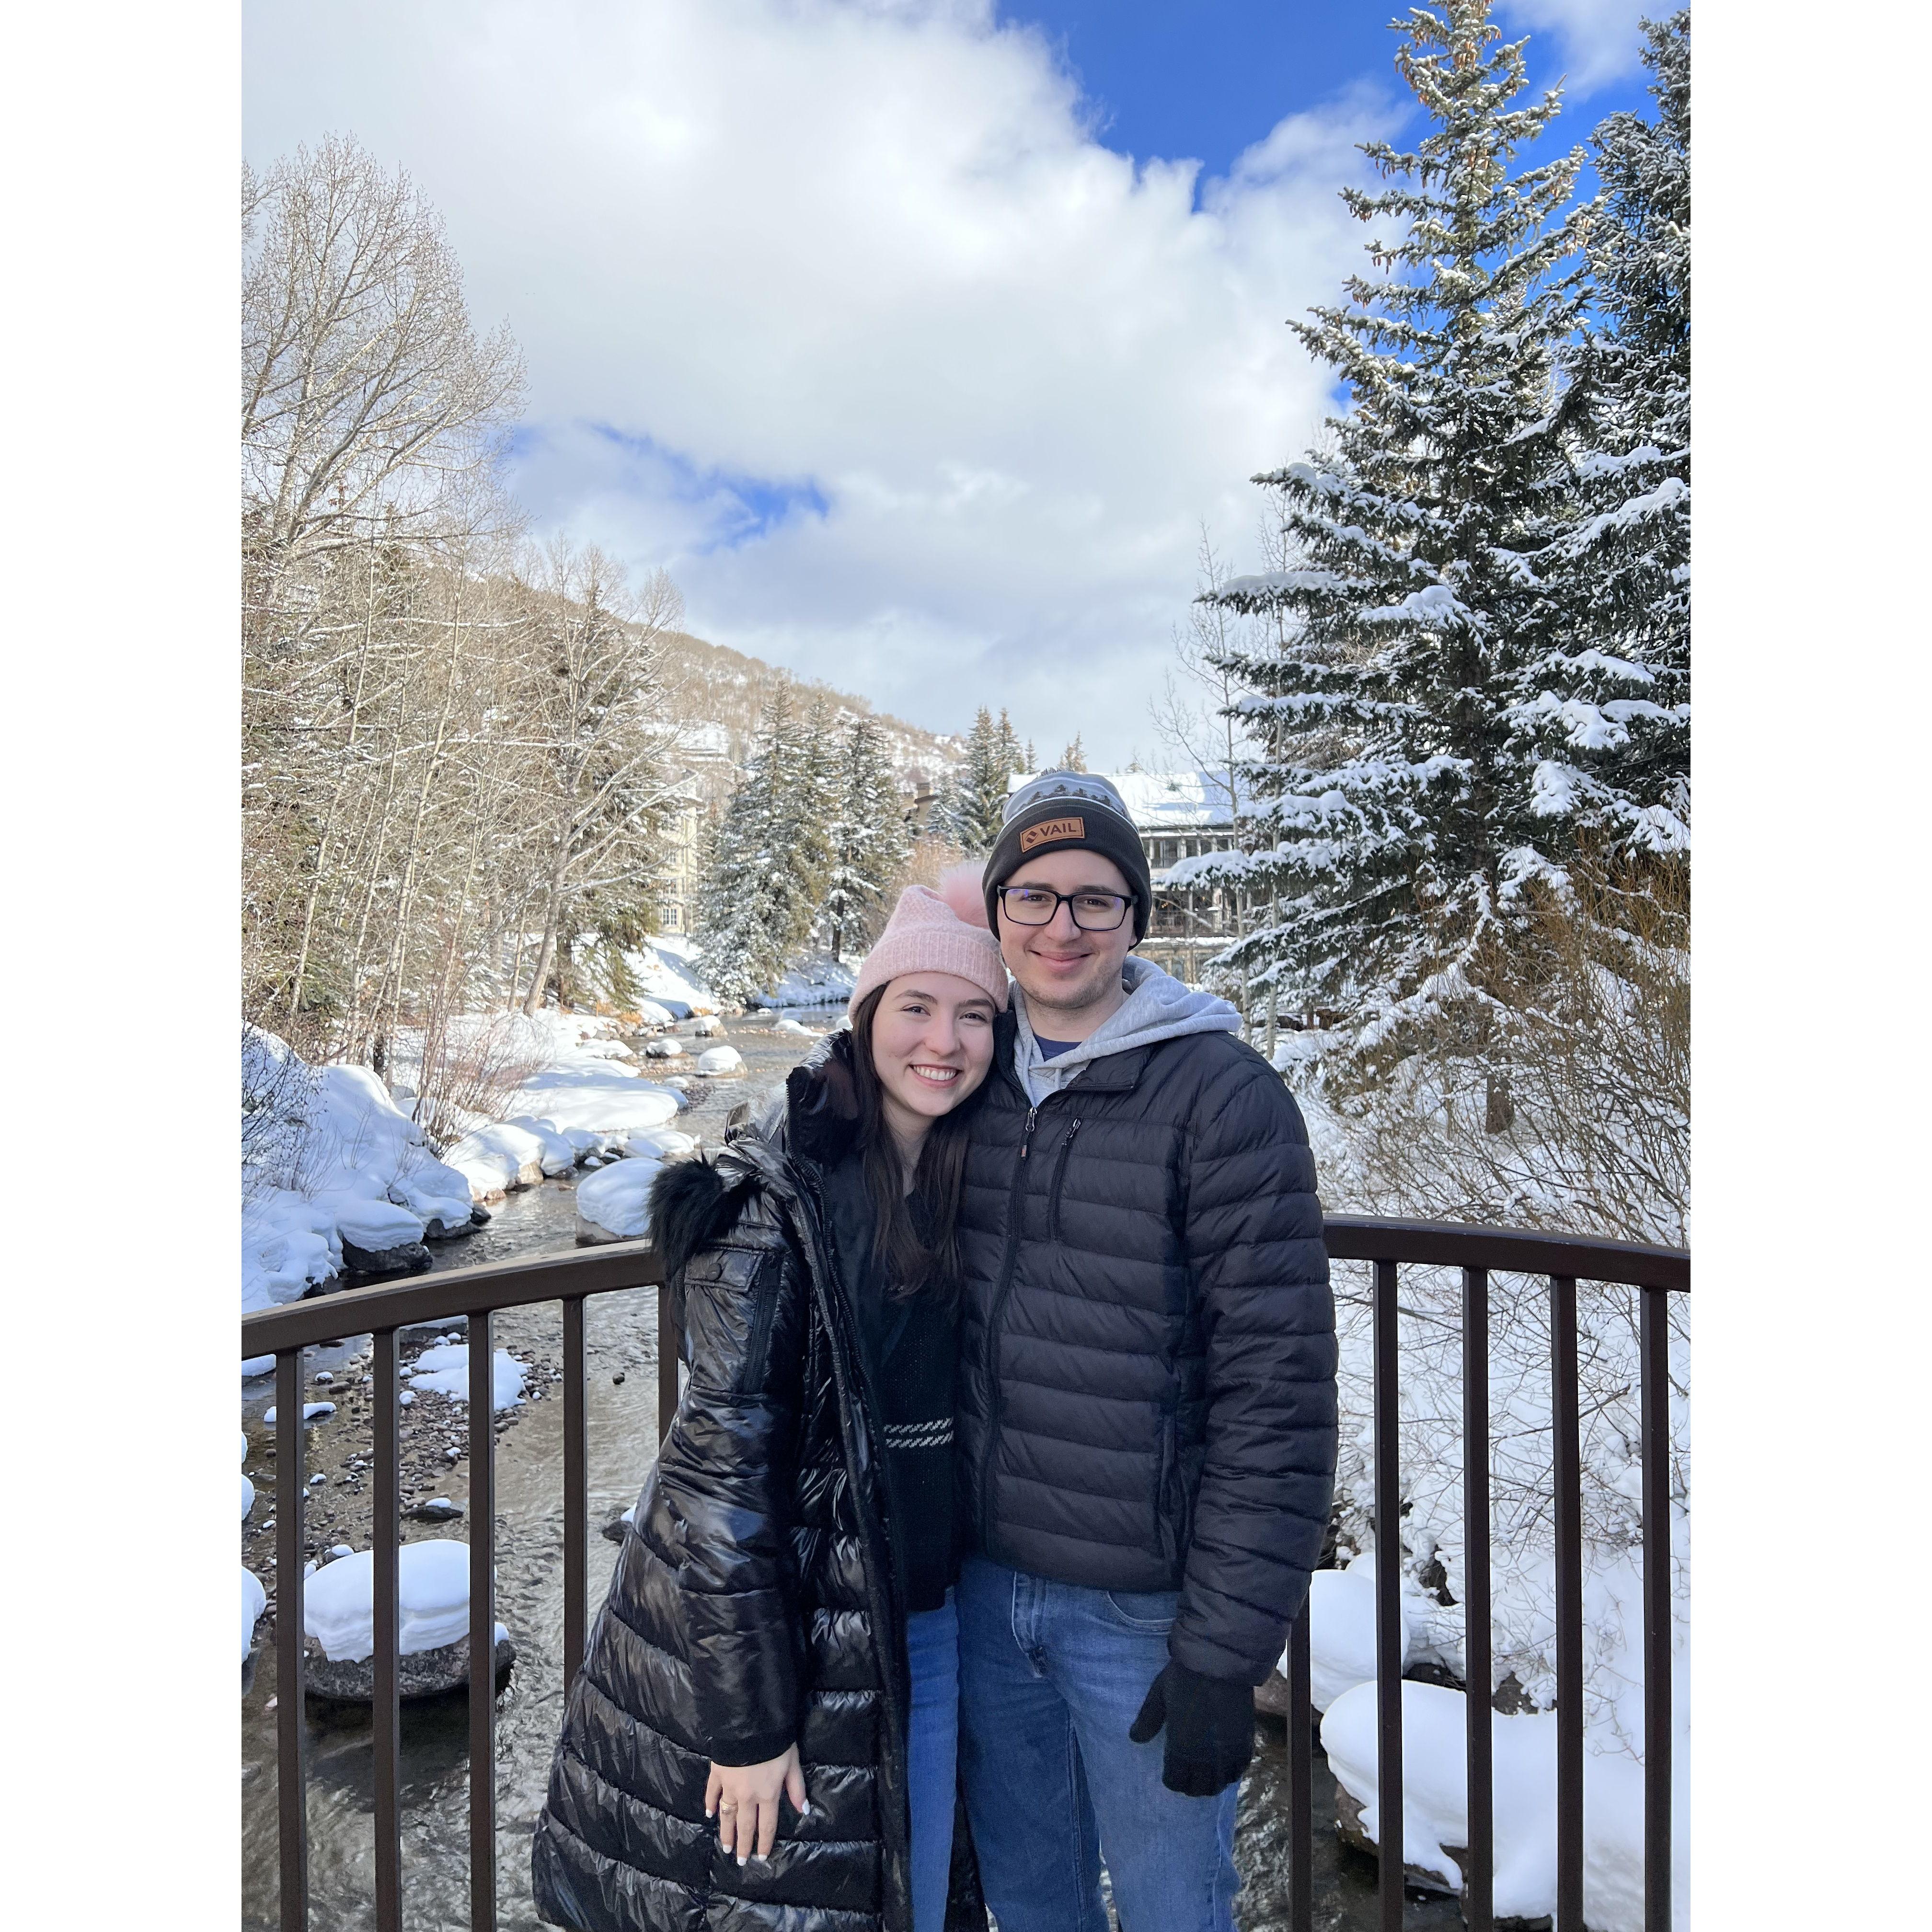 Smiling from Vail, Colorado